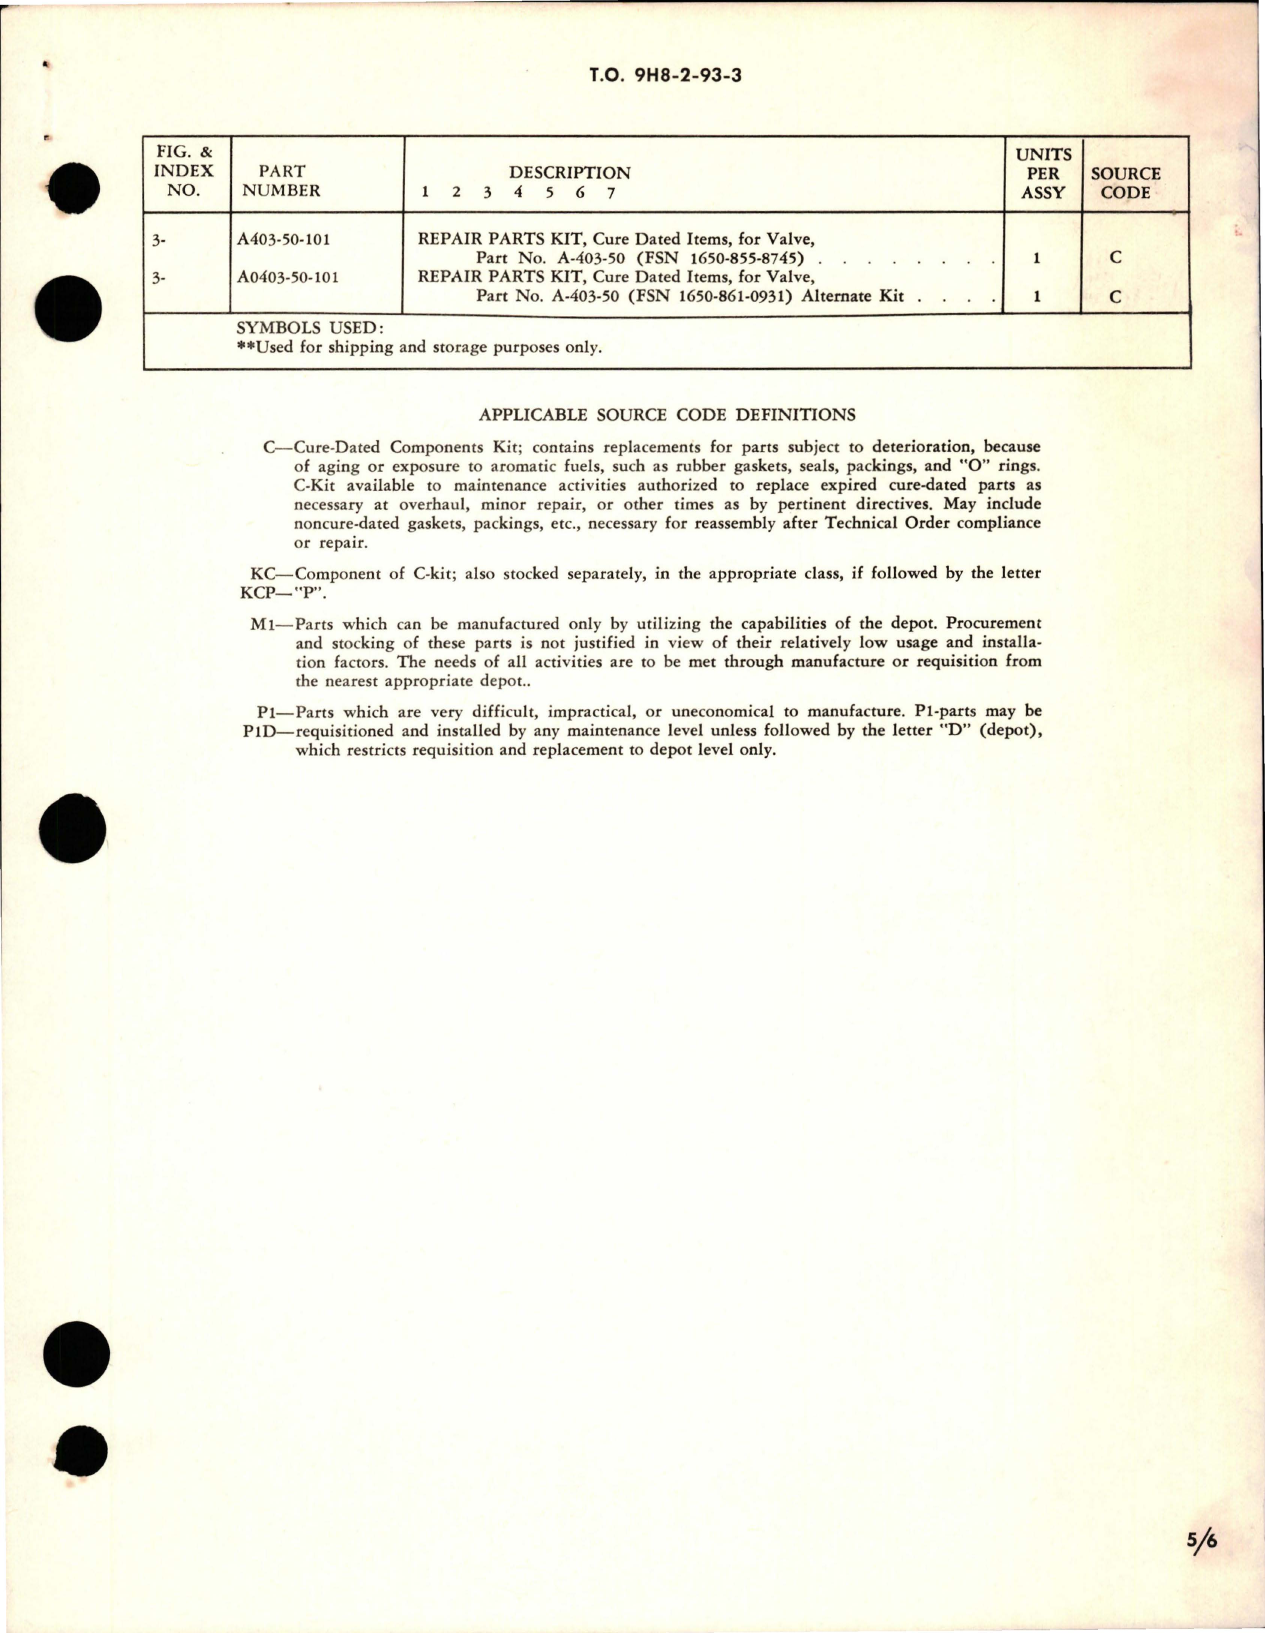 Sample page 5 from AirCorps Library document: Overhaul with Parts Breakdown for Inverted Relief Valve - Part A-403-50